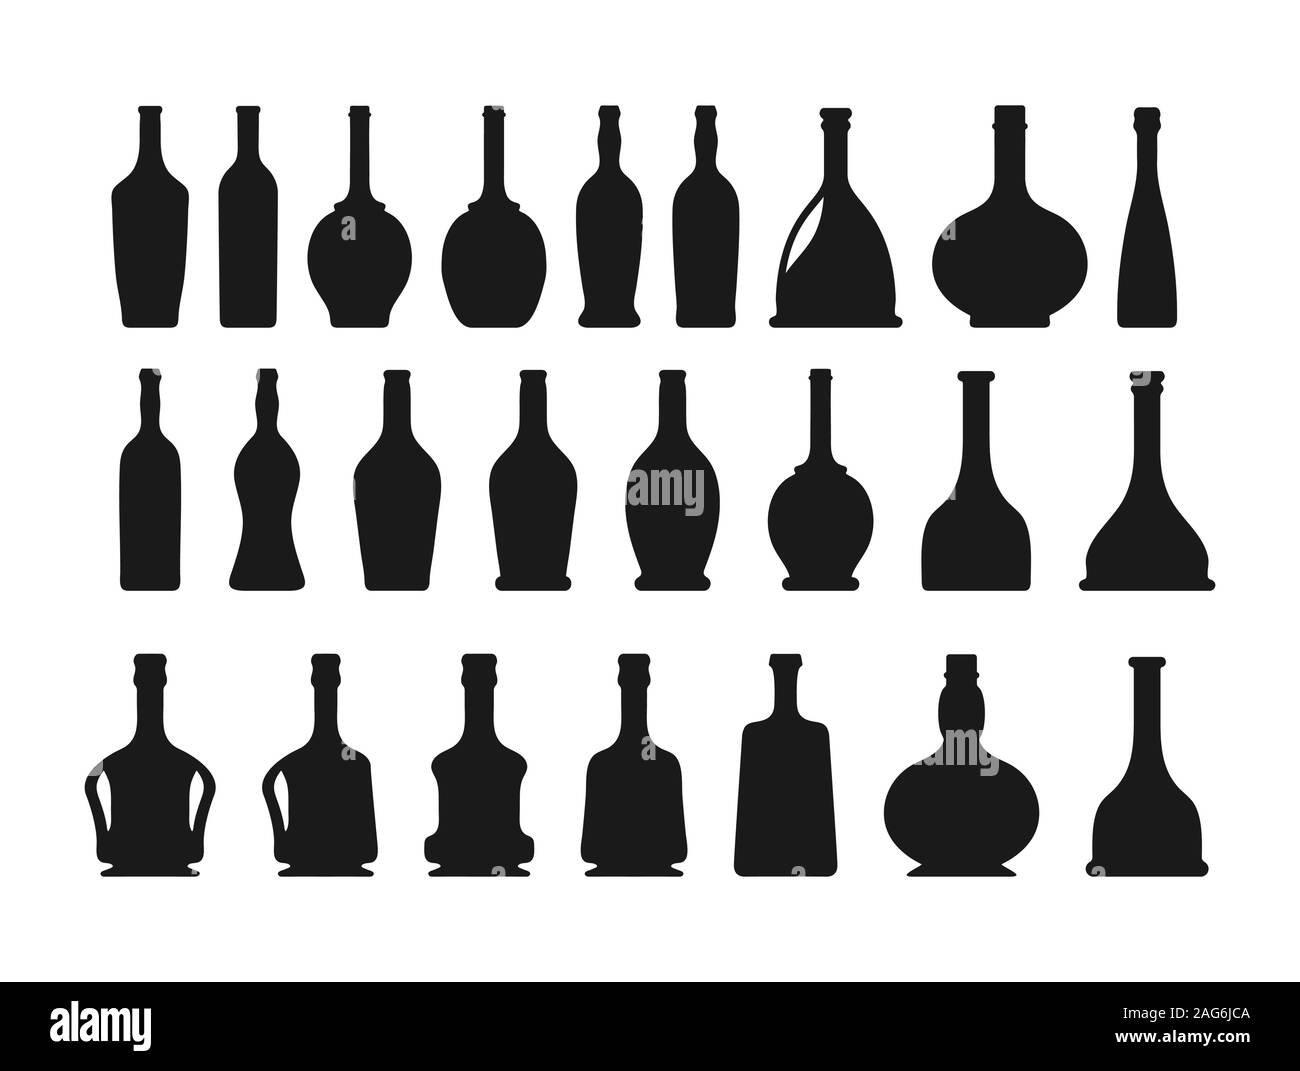 Set of silhouettes of bottles for alcoholic beverages. Isolated on white background in flat design style. Stock Vector